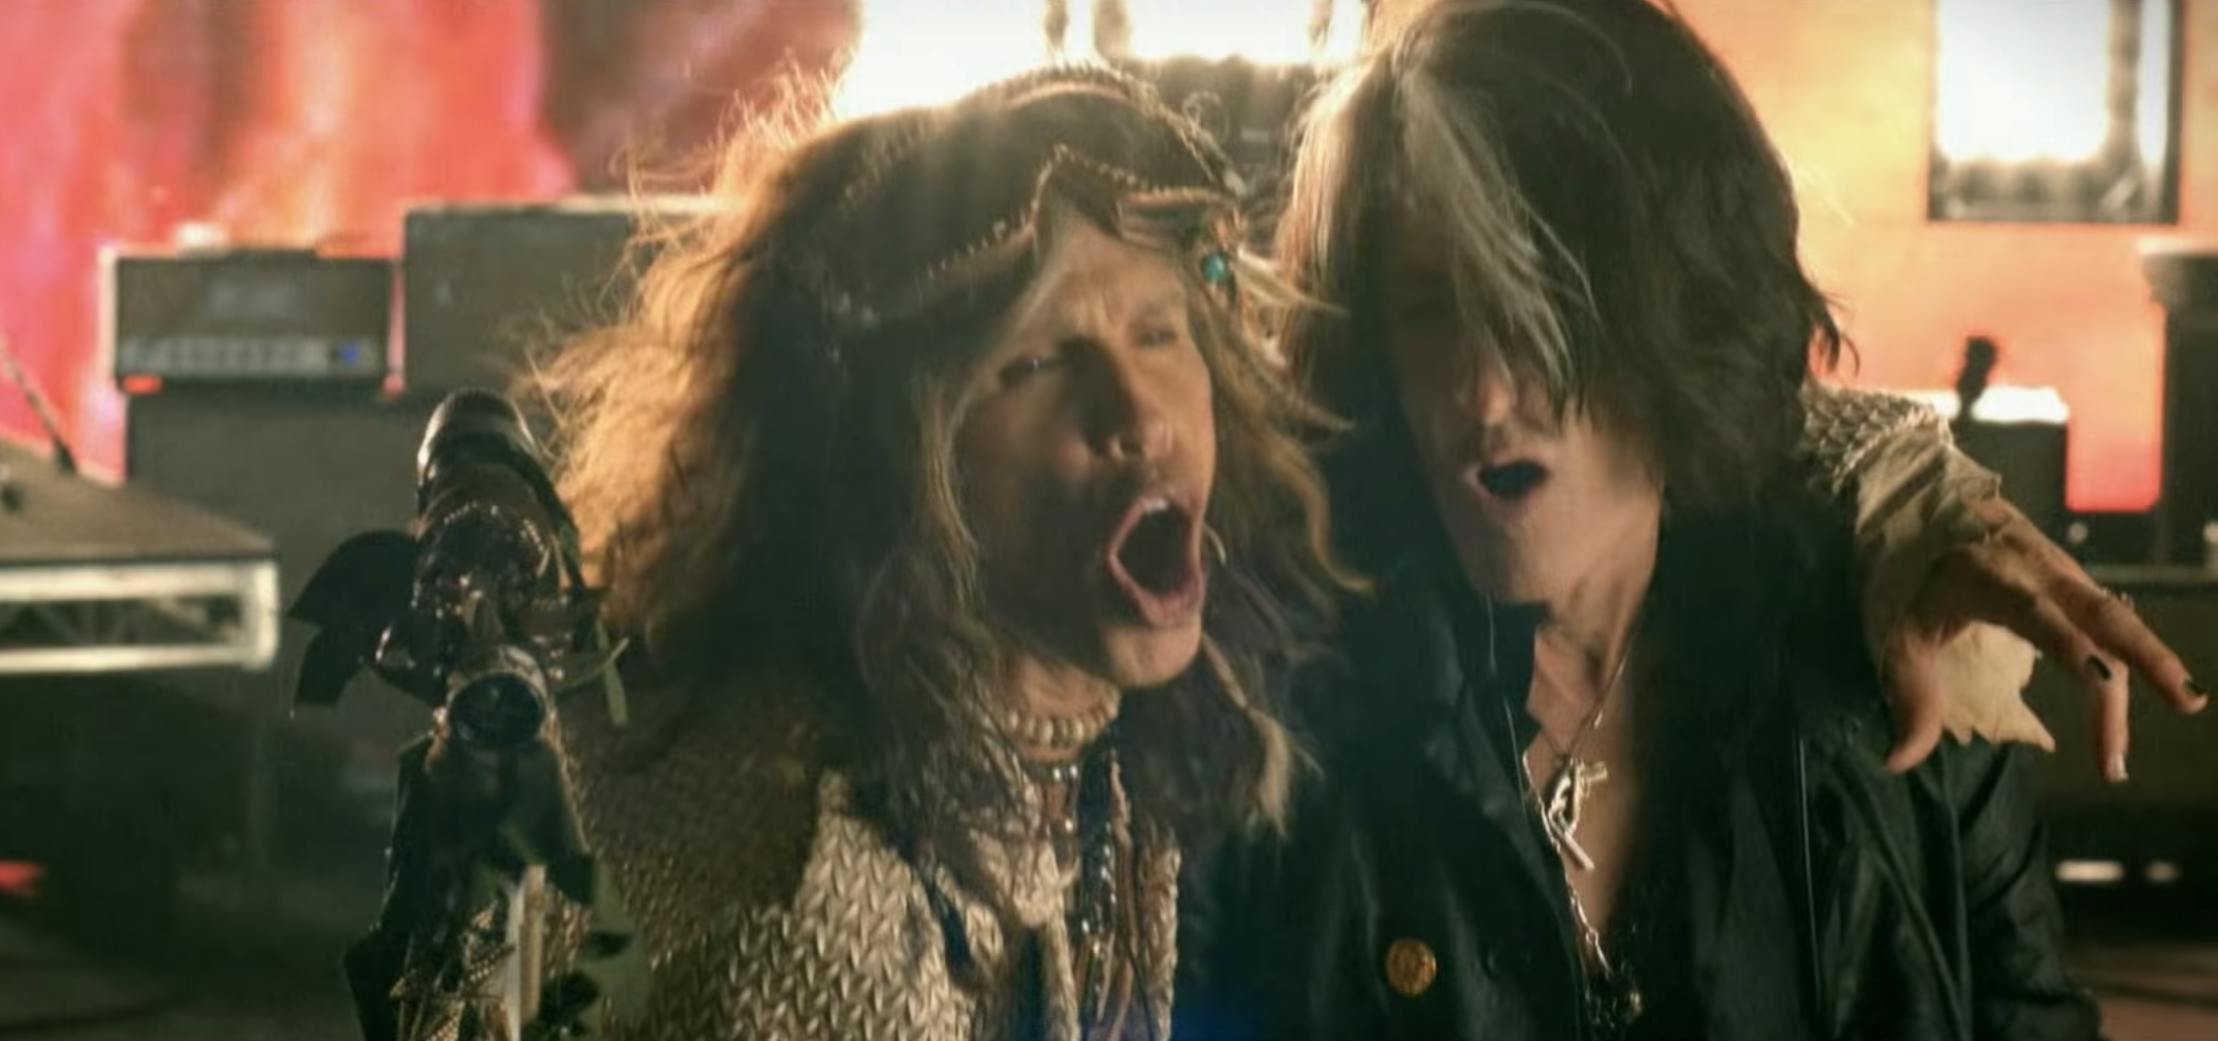 Joe Perry Says There Will Be A New Aerosmith Record